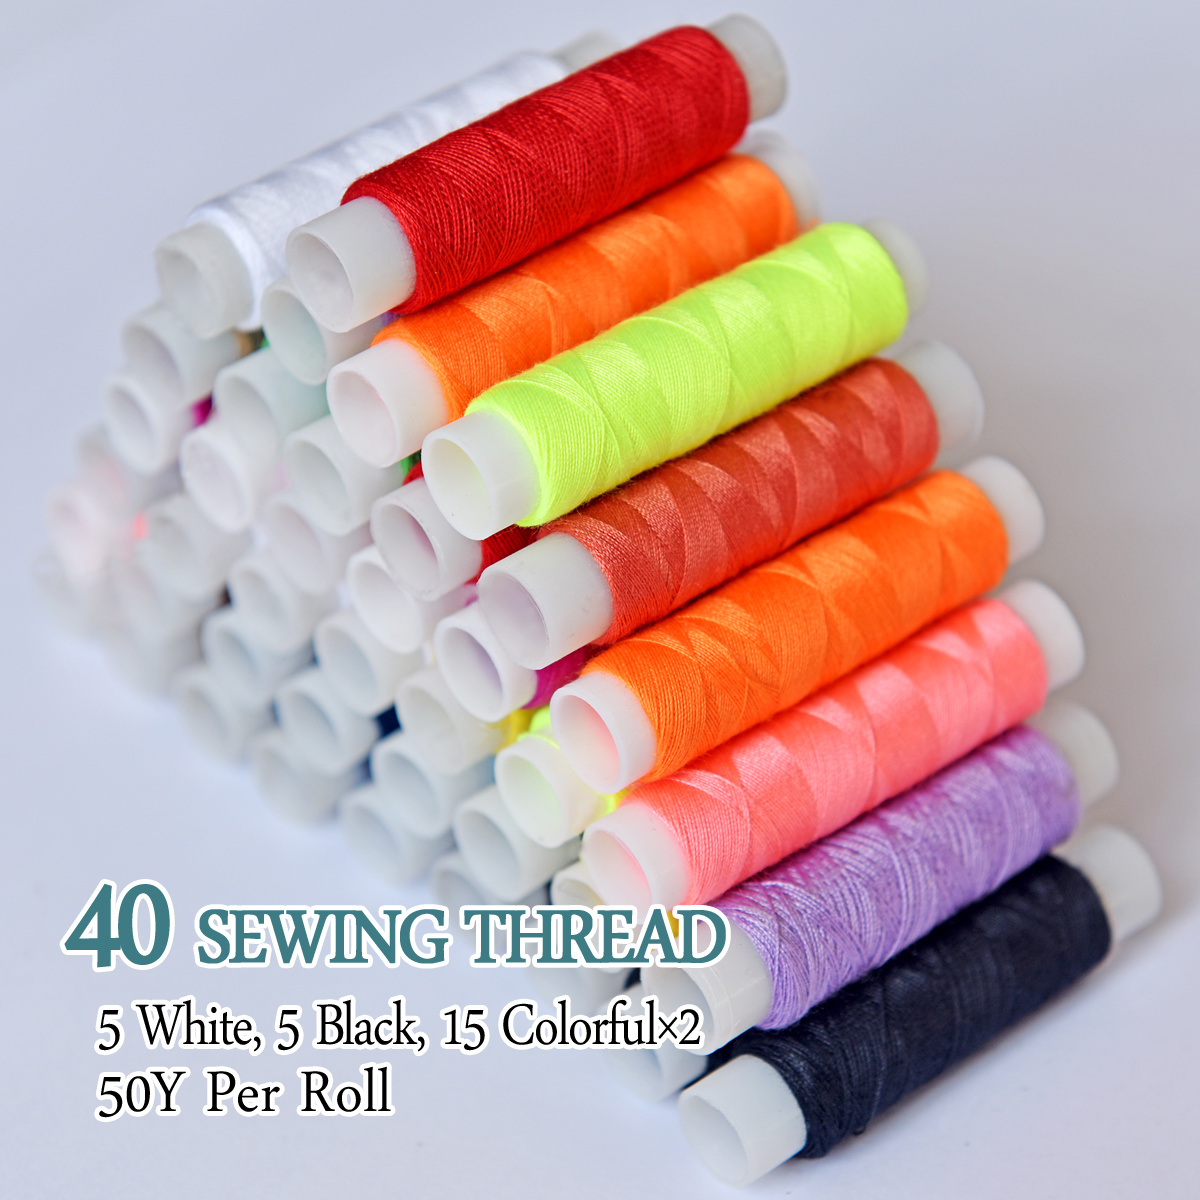 Sewing Thred Kit of 30 Colorful spools sewing thread, 5 spools white thread, 5 spools black thread